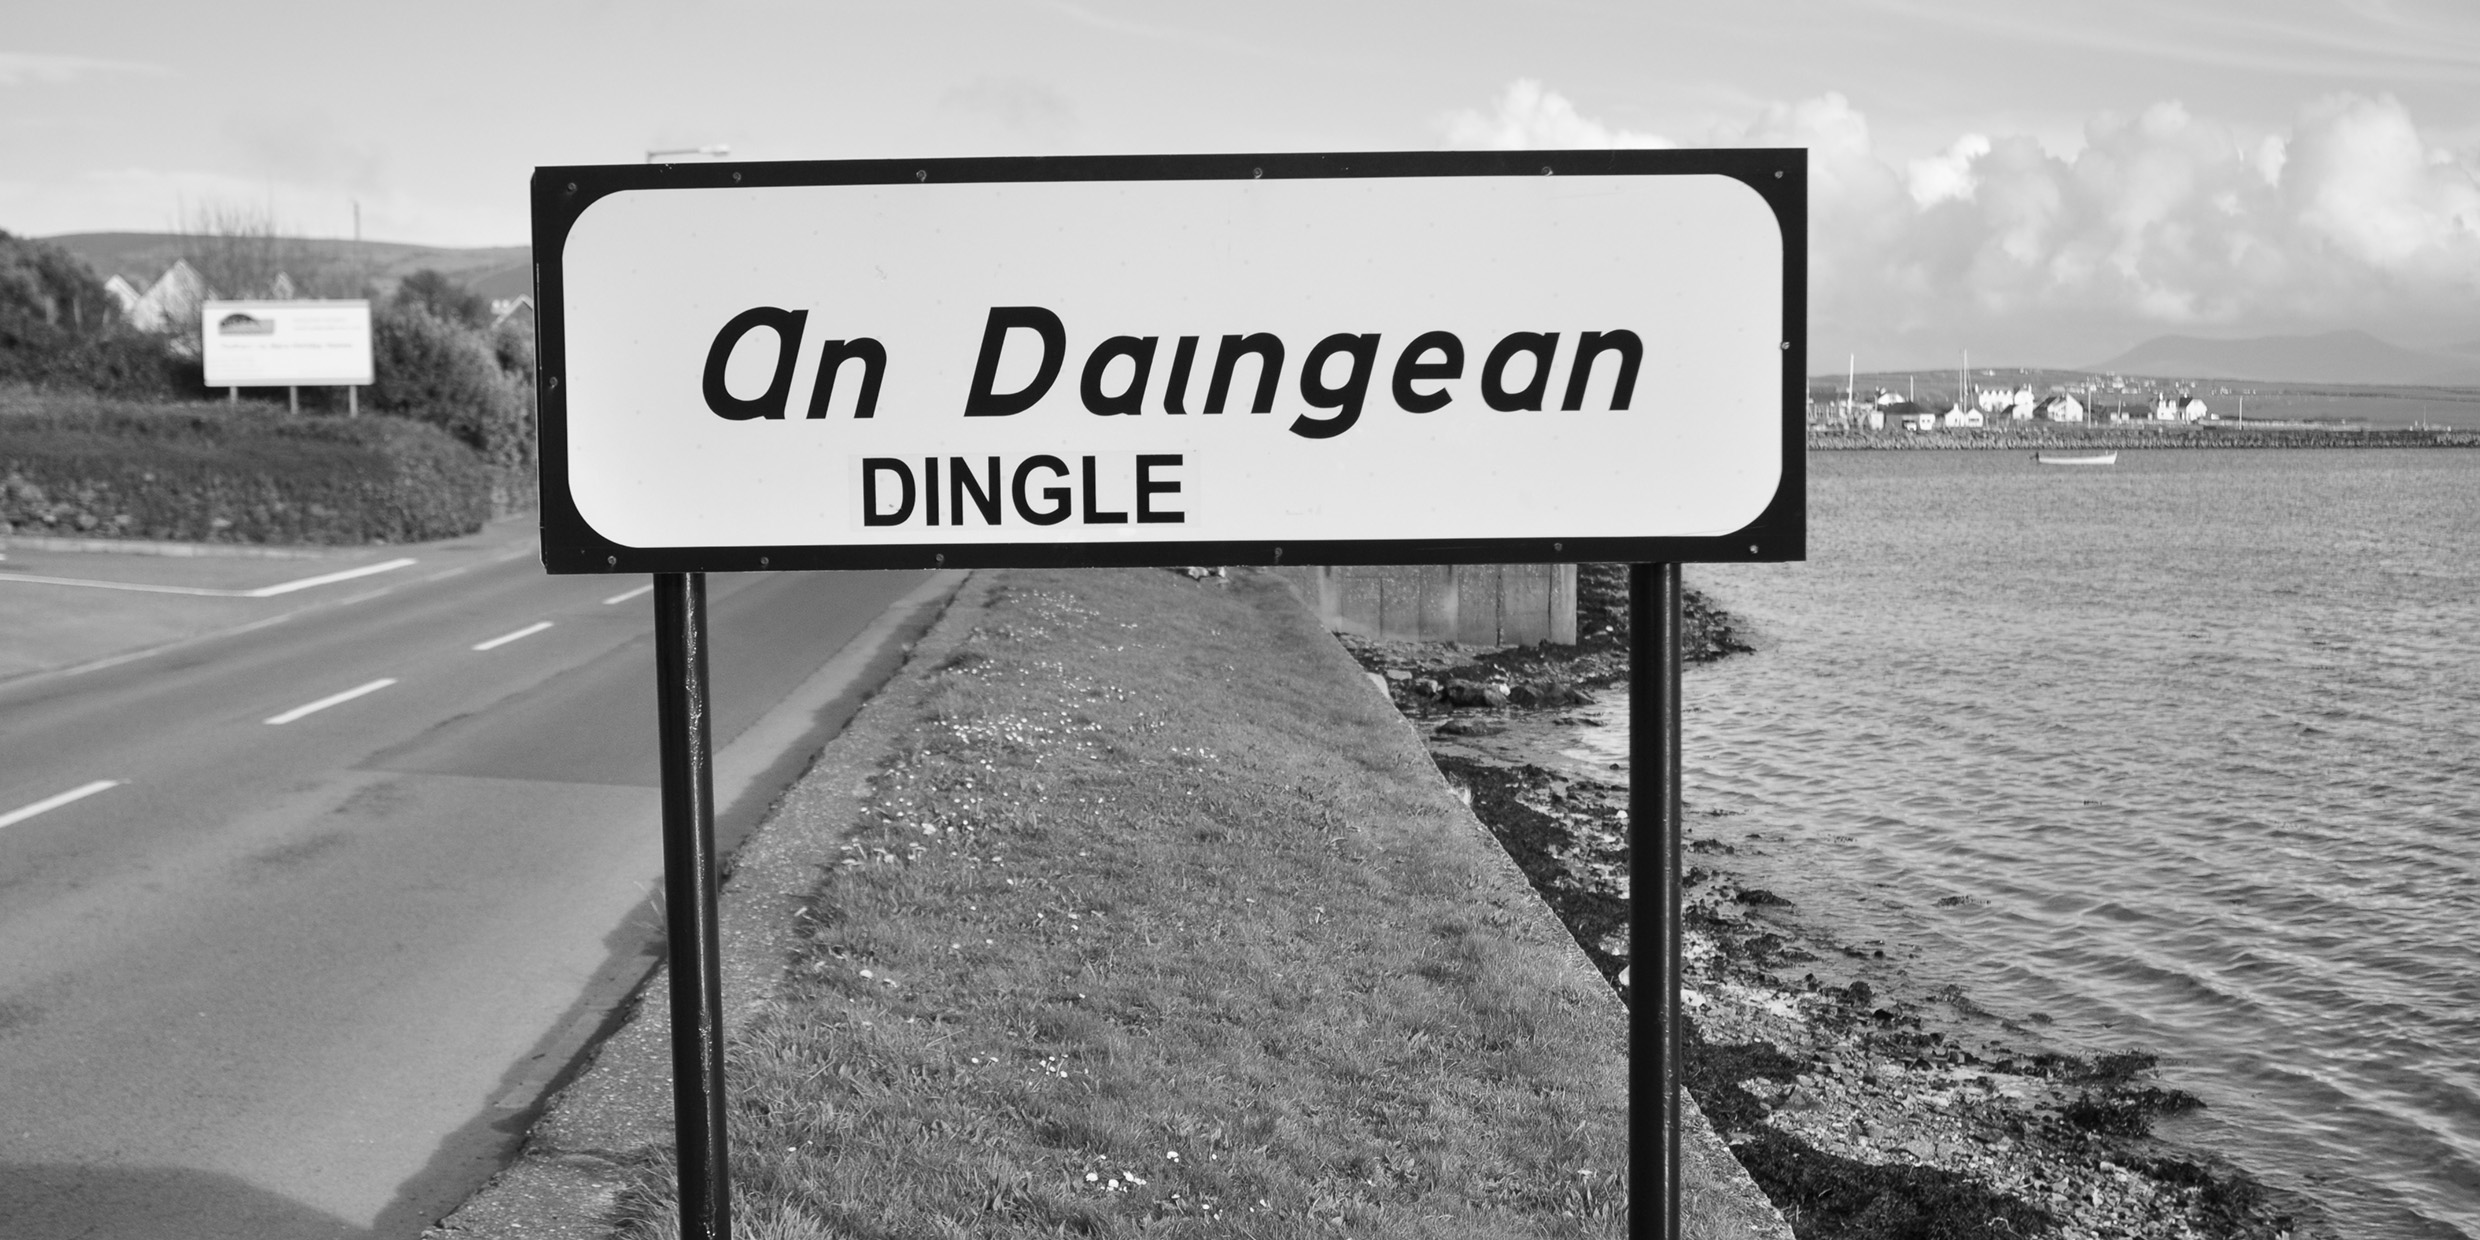 Image of a road sign in Ireland with a placename in both Irish and English